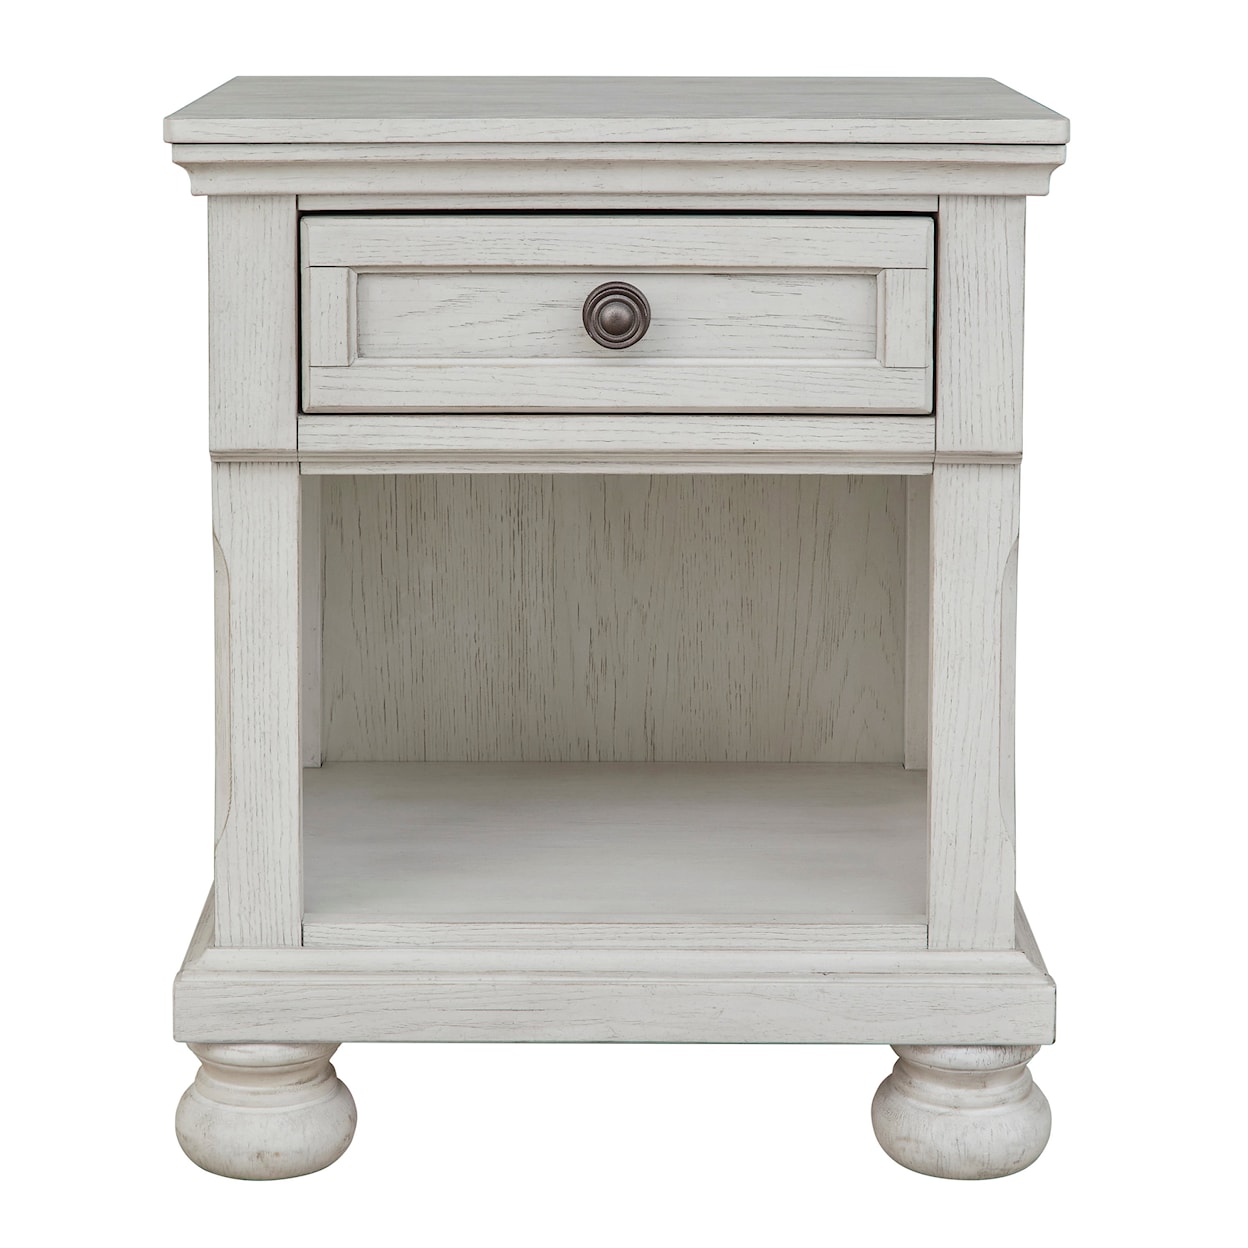 Signature Design by Ashley Robbinsdale Nightstand